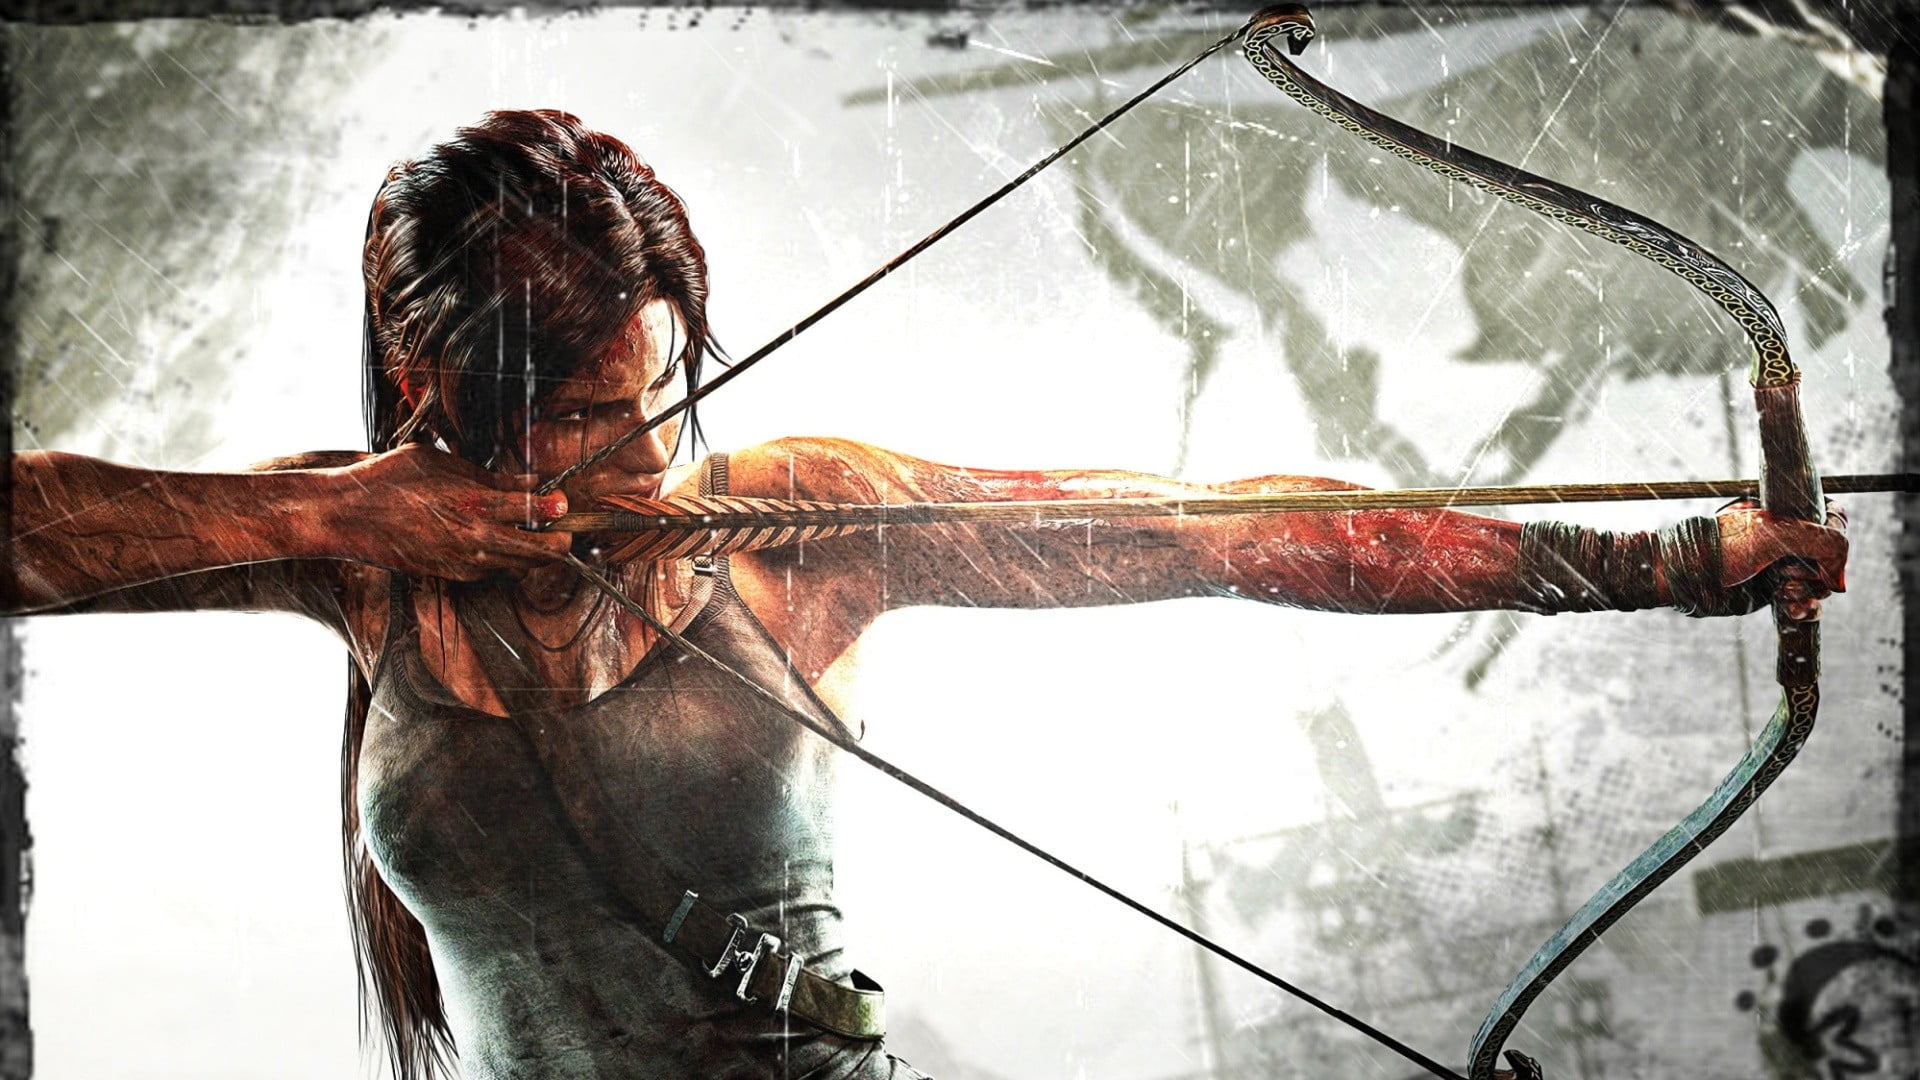 untitled, video games, Tomb Raider, Lara Croft, real people, one person